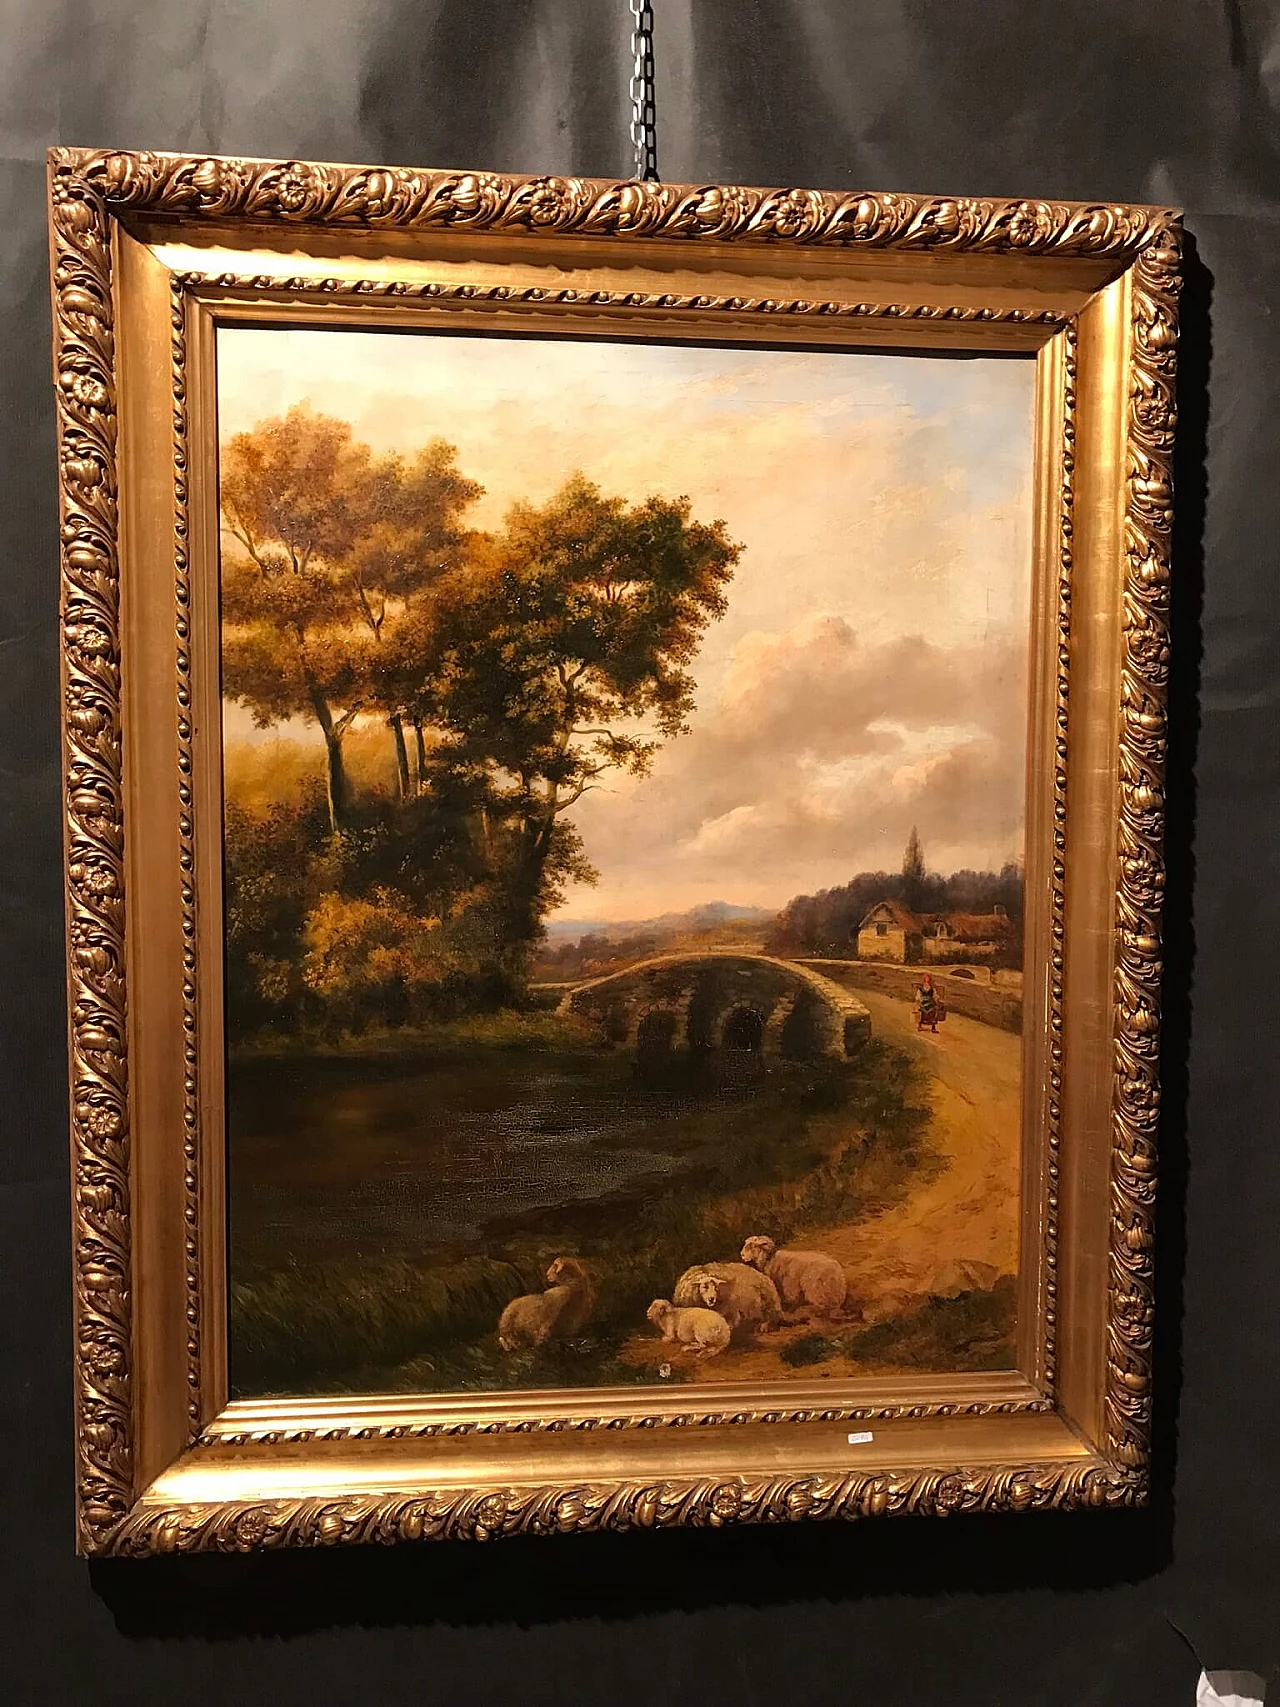 Oil painting on canvas with bucolic landscape, '800 1175902